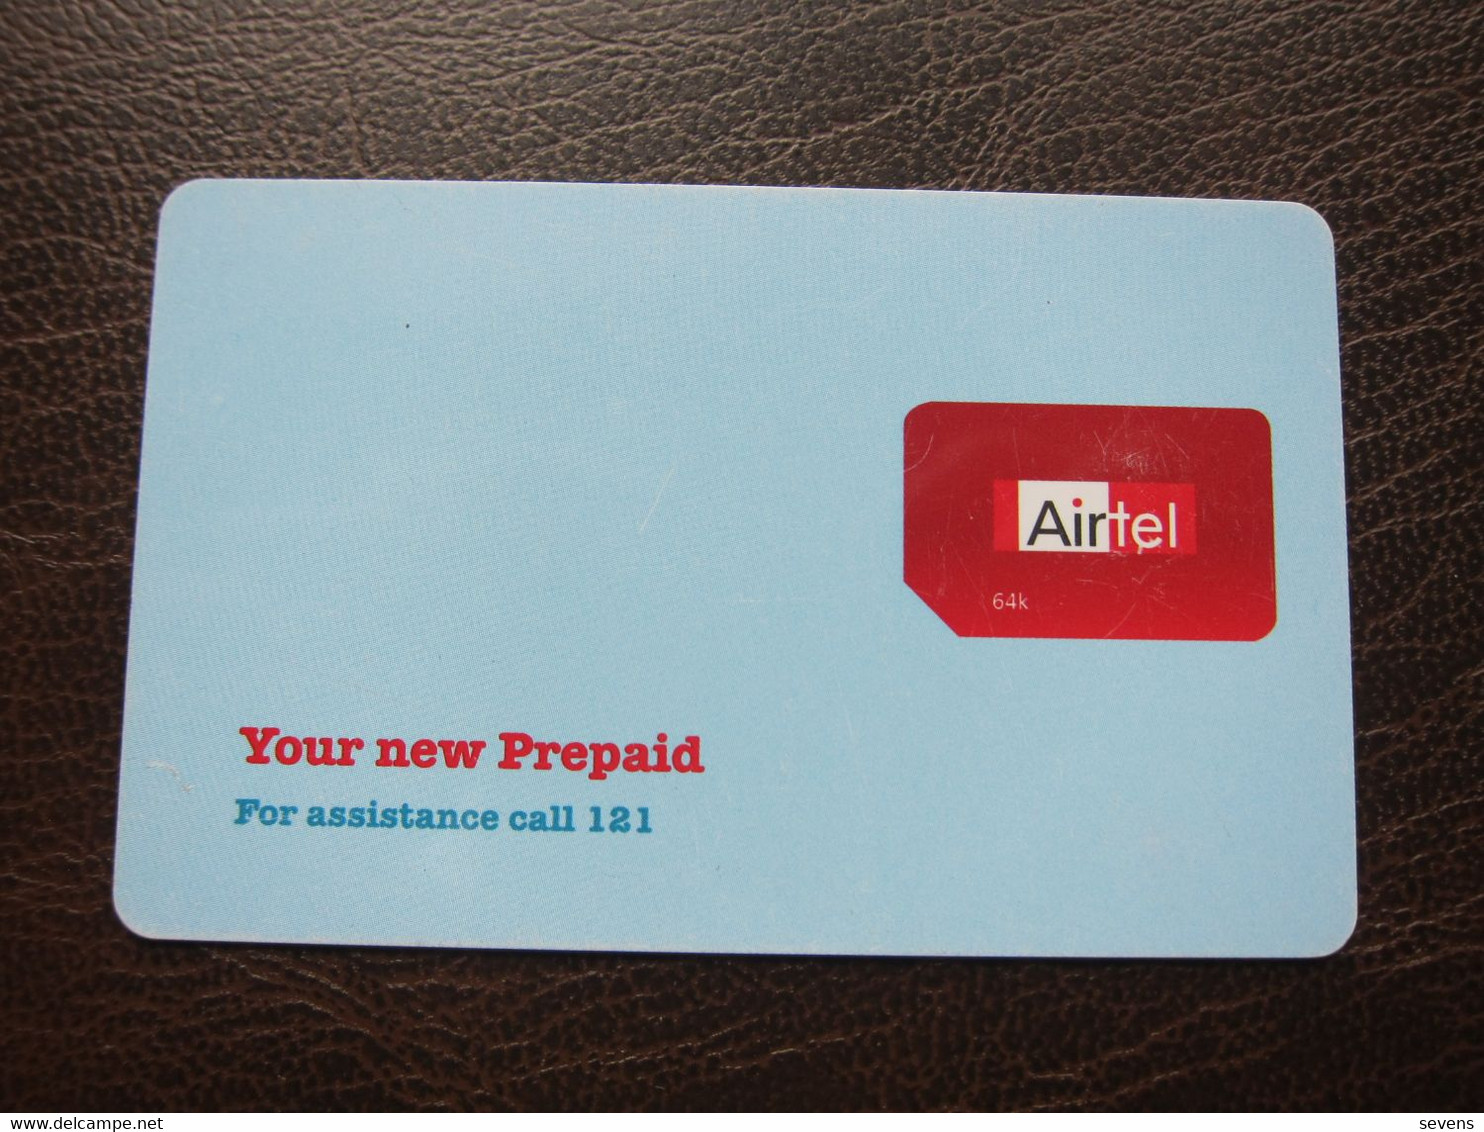 Airtel 64K GSM SIM Card, Sample Card Without Account Number, With Scratchs, Chip Moudle Wrong Cut - Inde